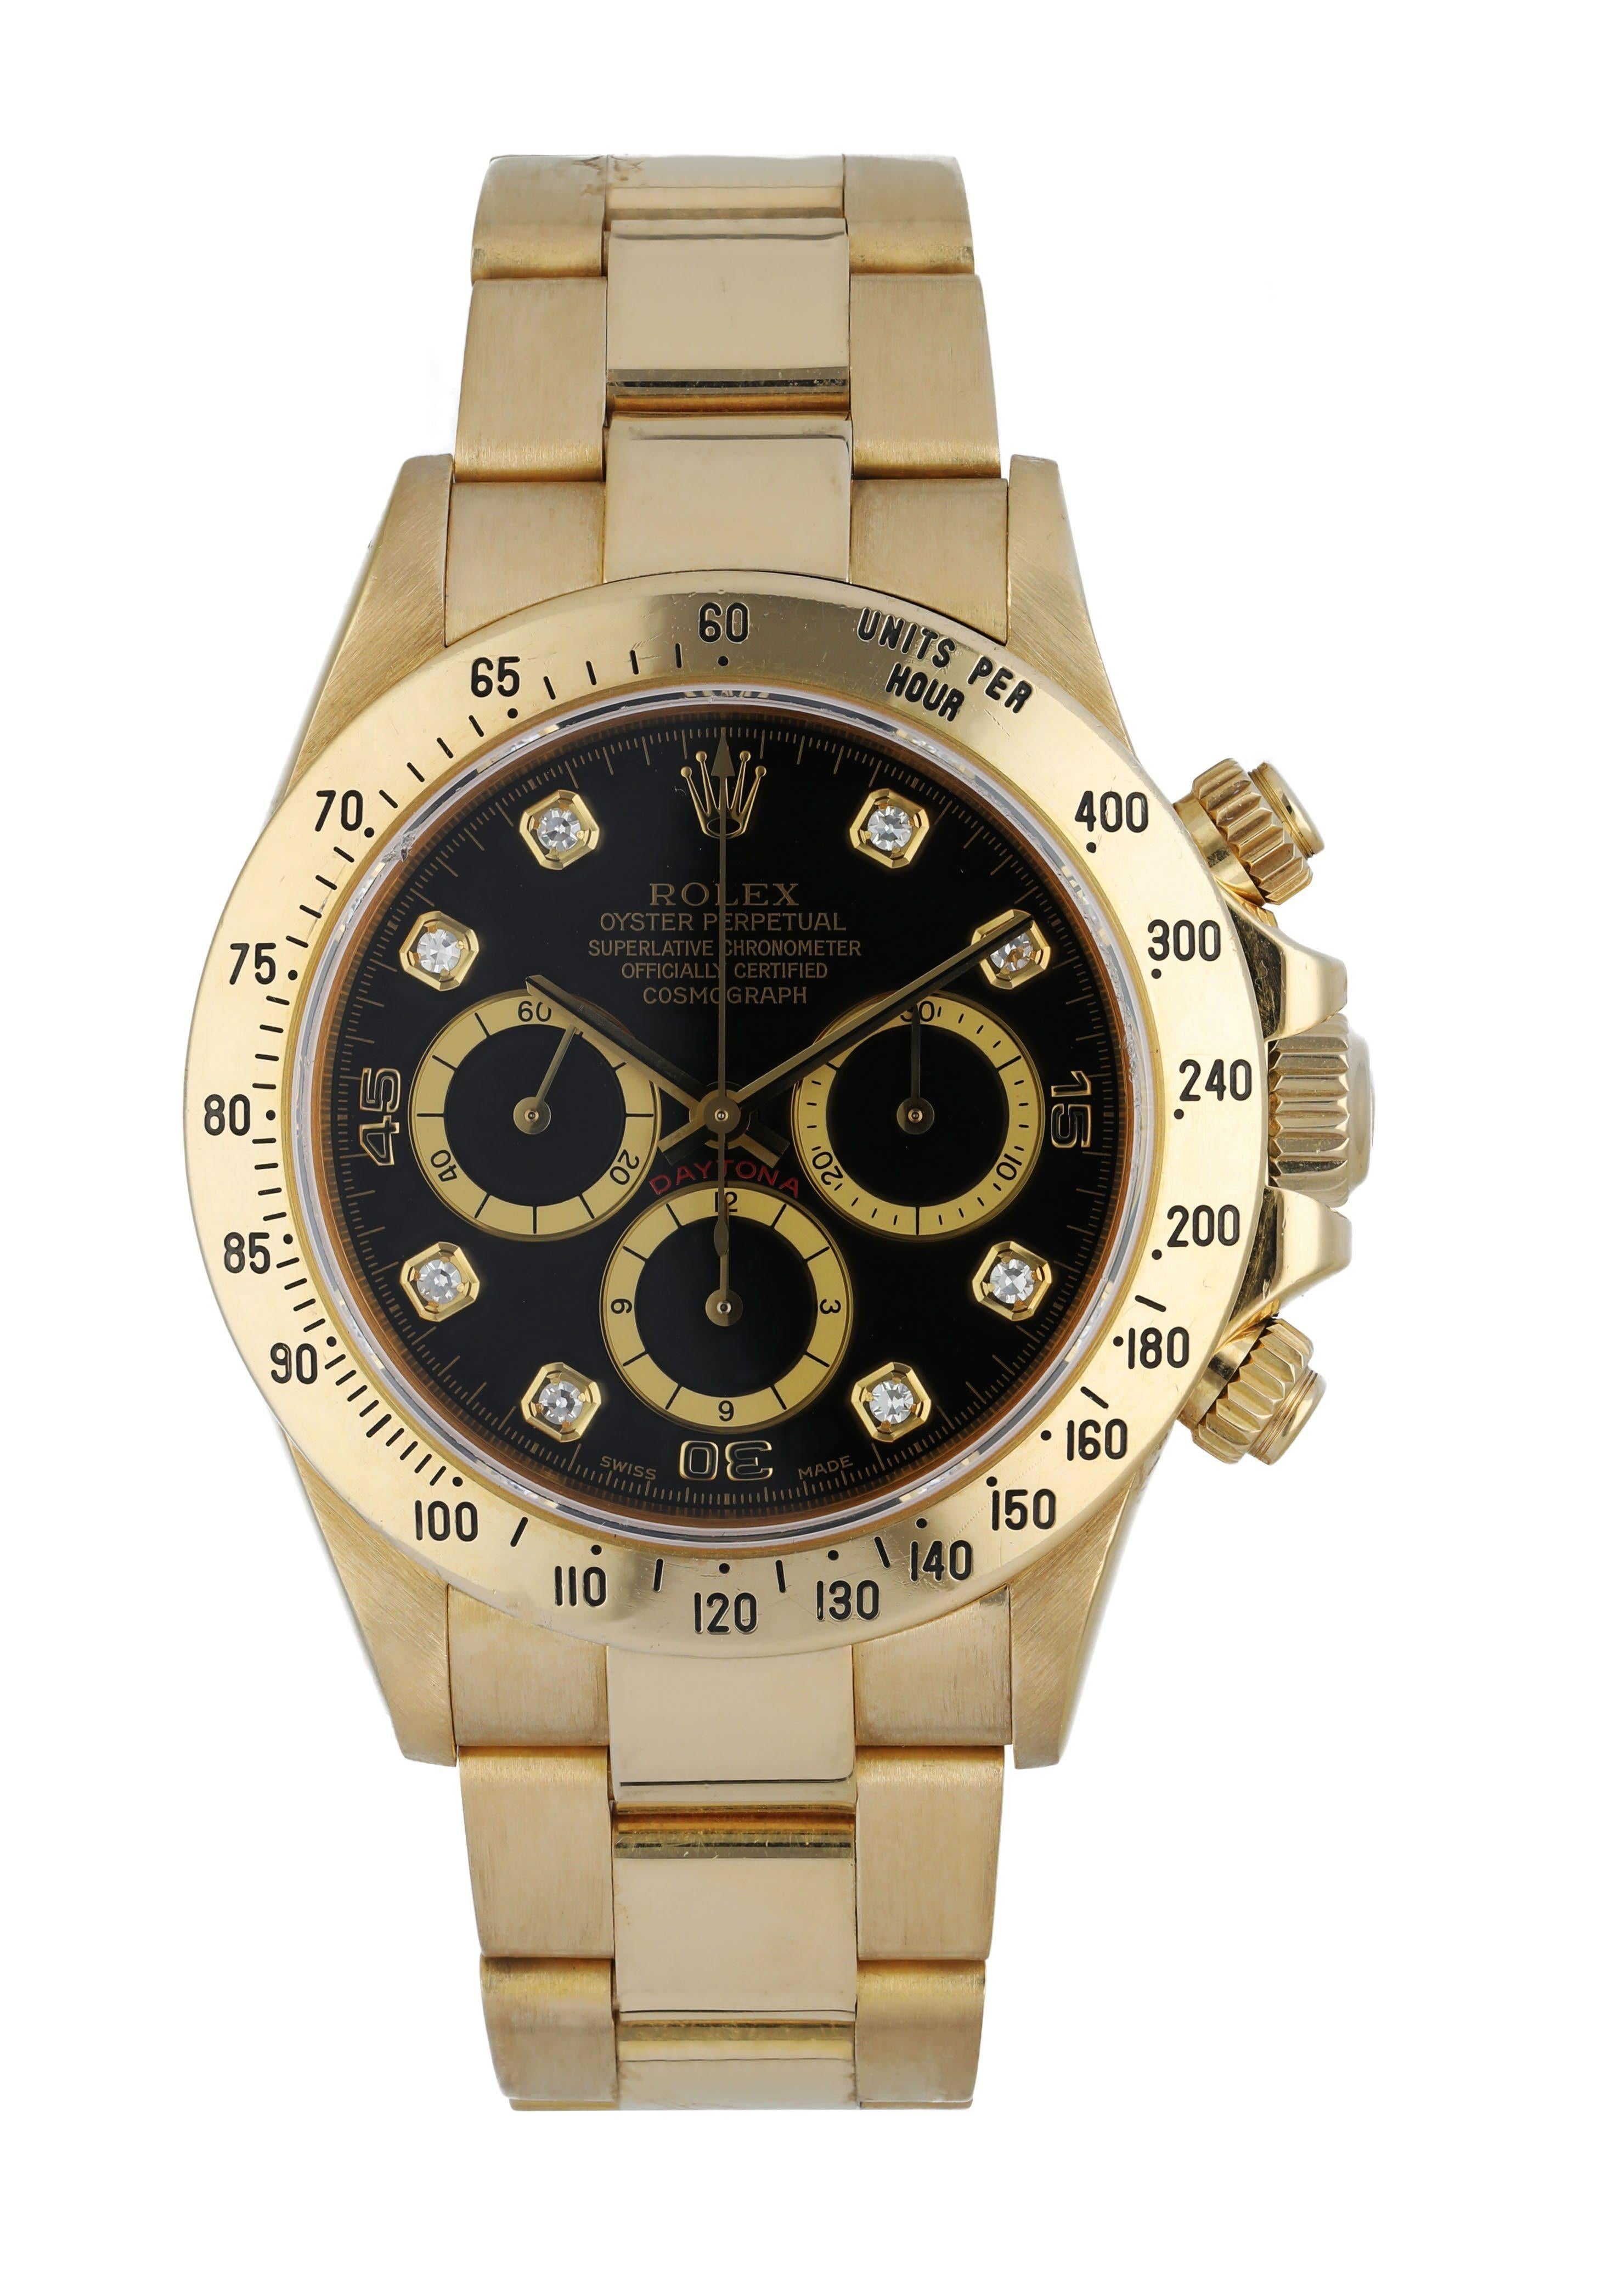 Rolex Daytona  Zenith 16528 Men's Watch. 
40mm 18k Yellow gold case. 
Yellow Gold Tachymeter bezel. 
Black dial with gold hands and factory set diamond hour markers. 
Minute markers on the outer dial. 
Yellow Gold Bracelet with Fold Over Clasp With